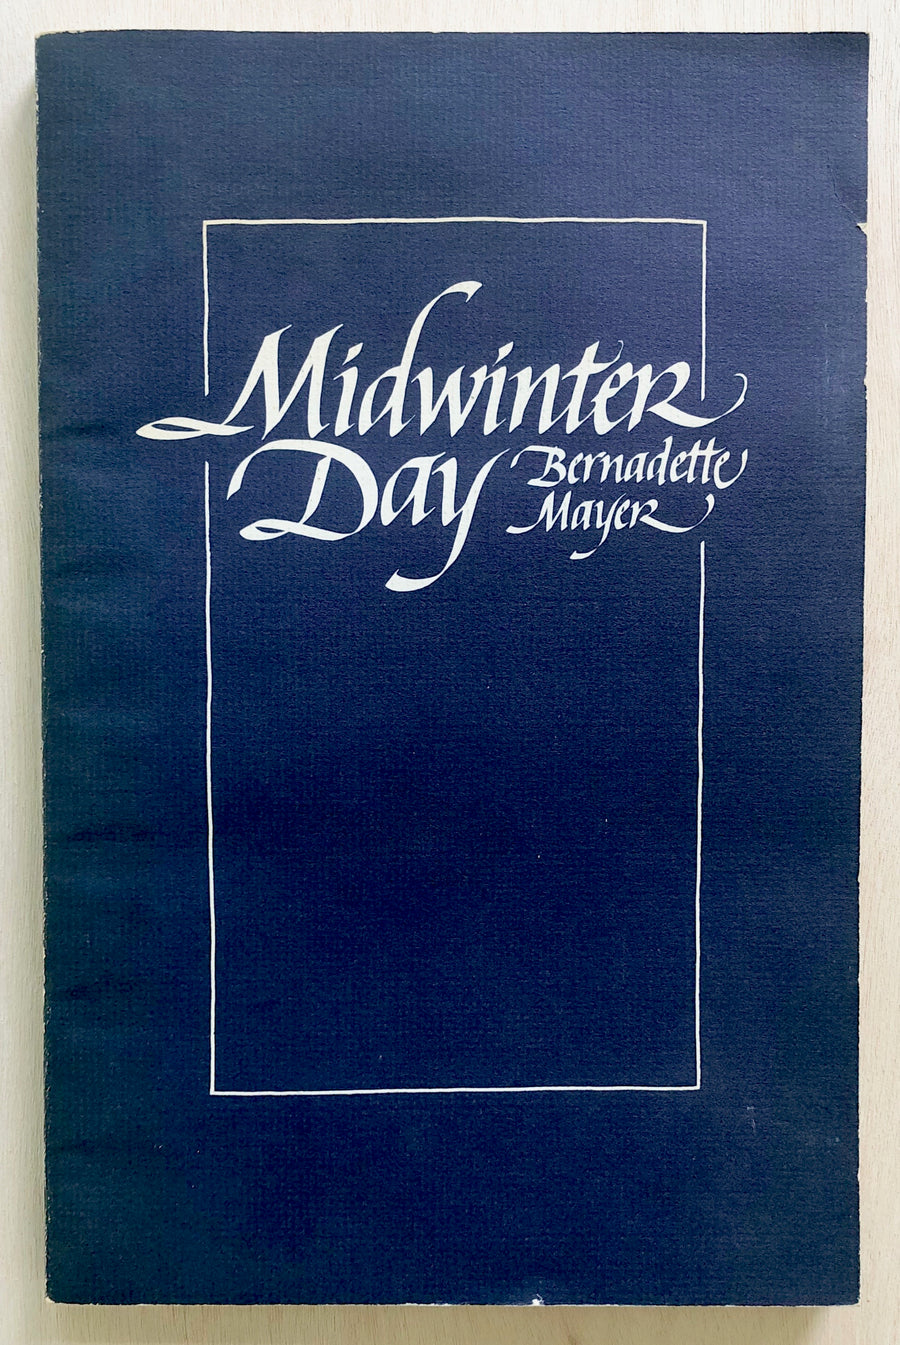 MIDWINTER DAY by Bernadette Mayer (SIGNED)